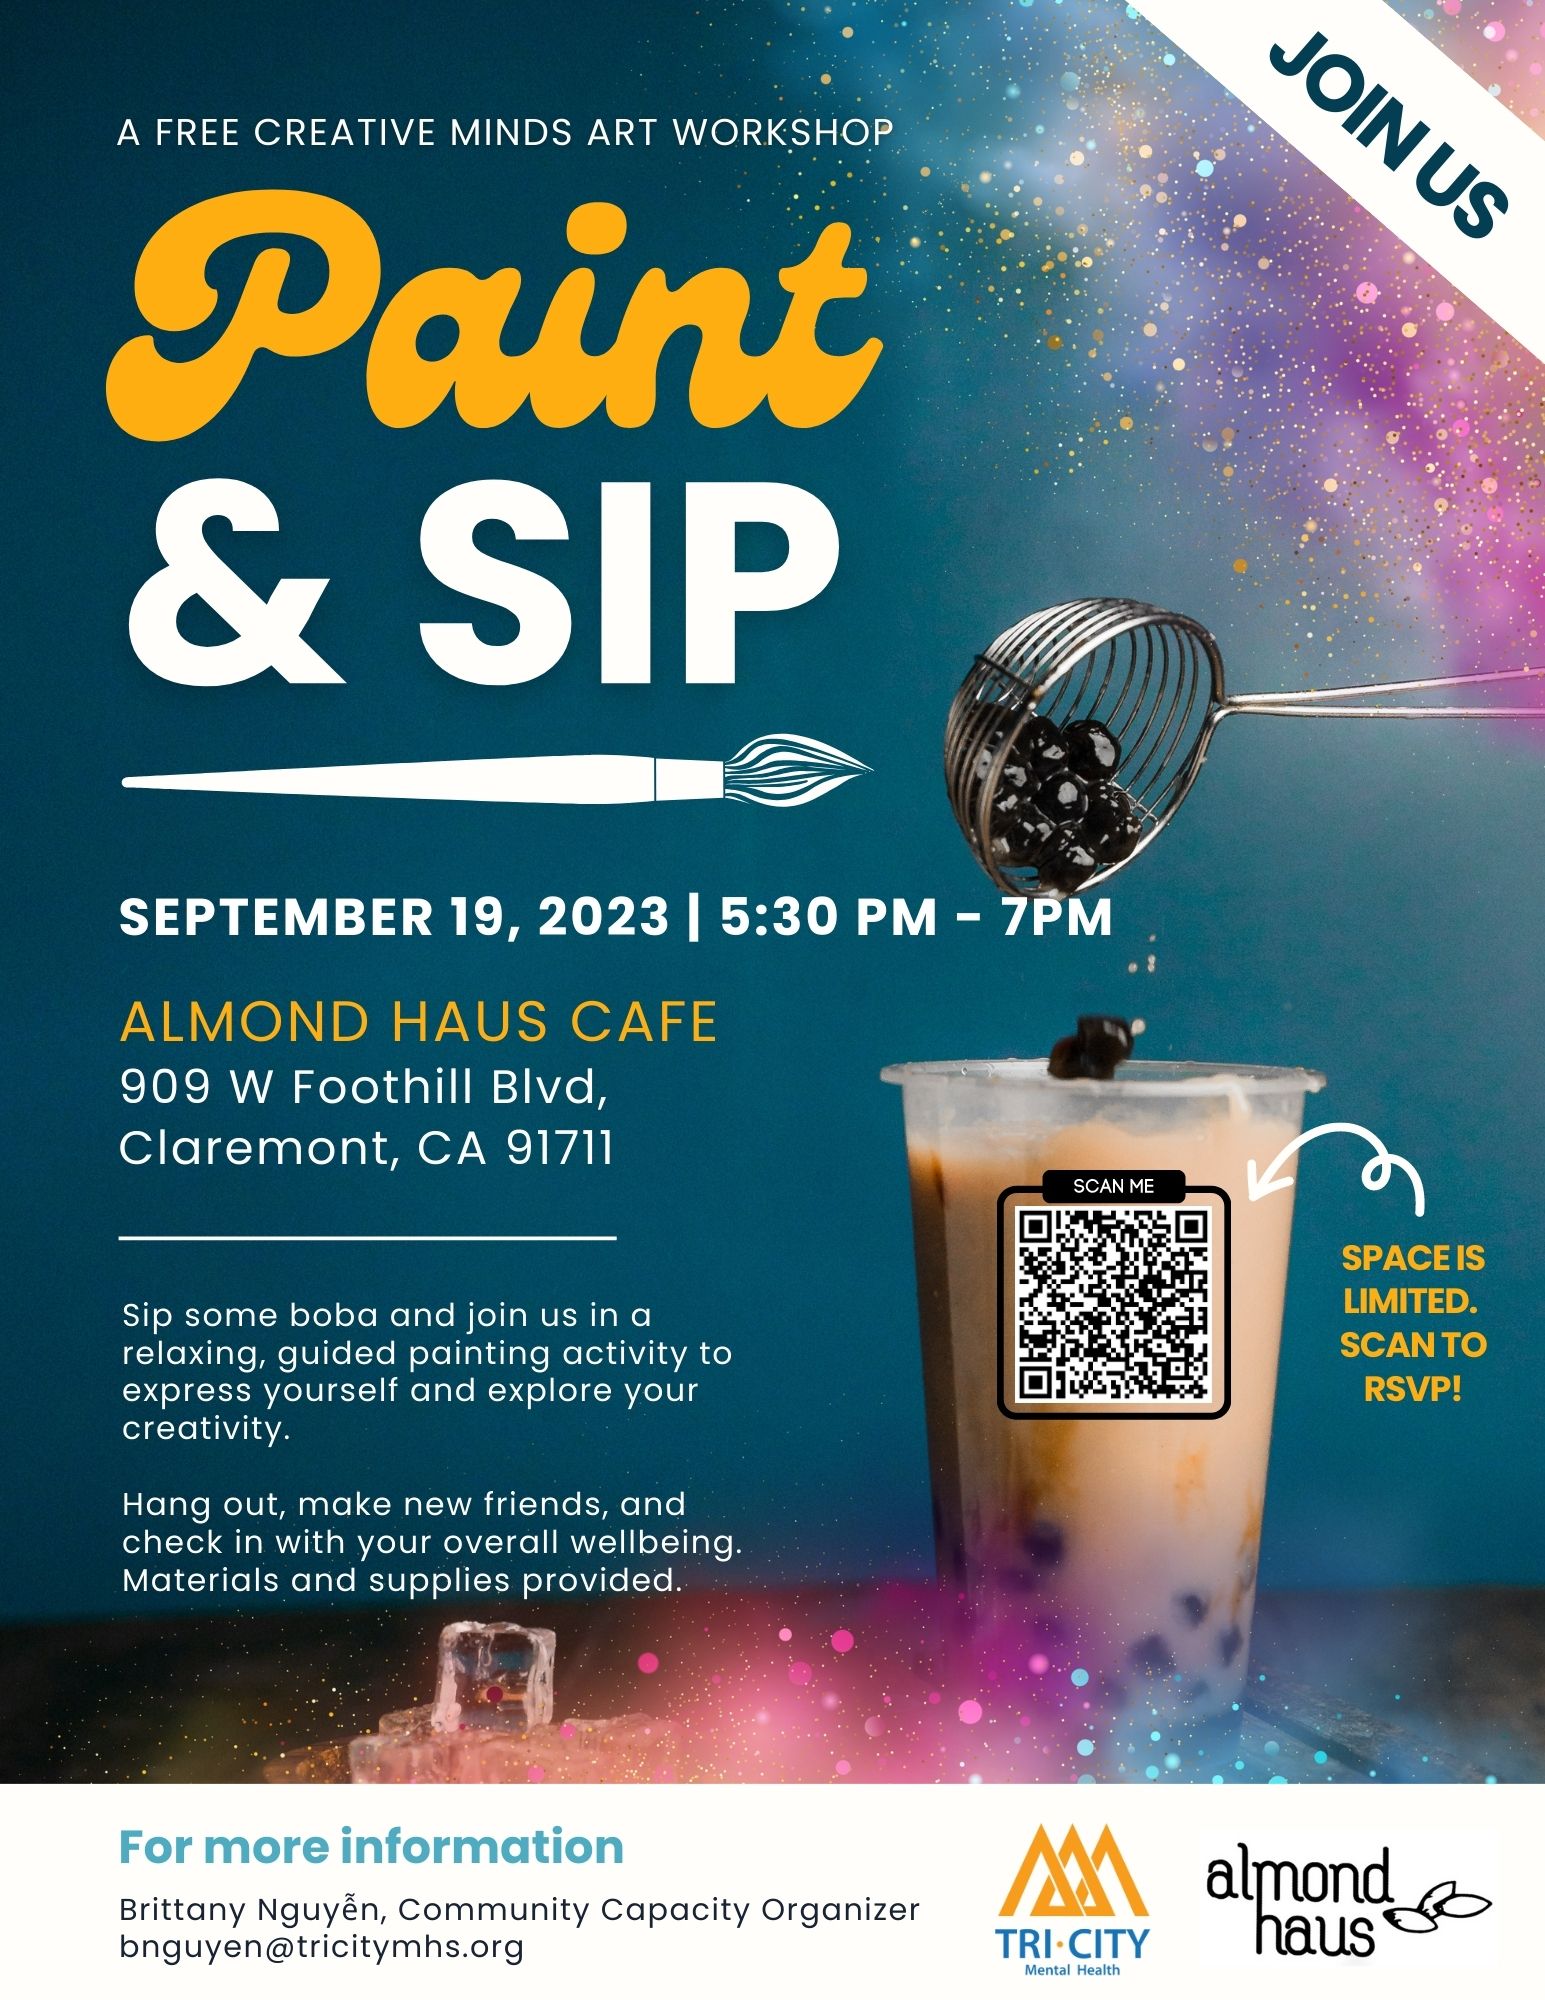 Paint & Sip at Almond Haus